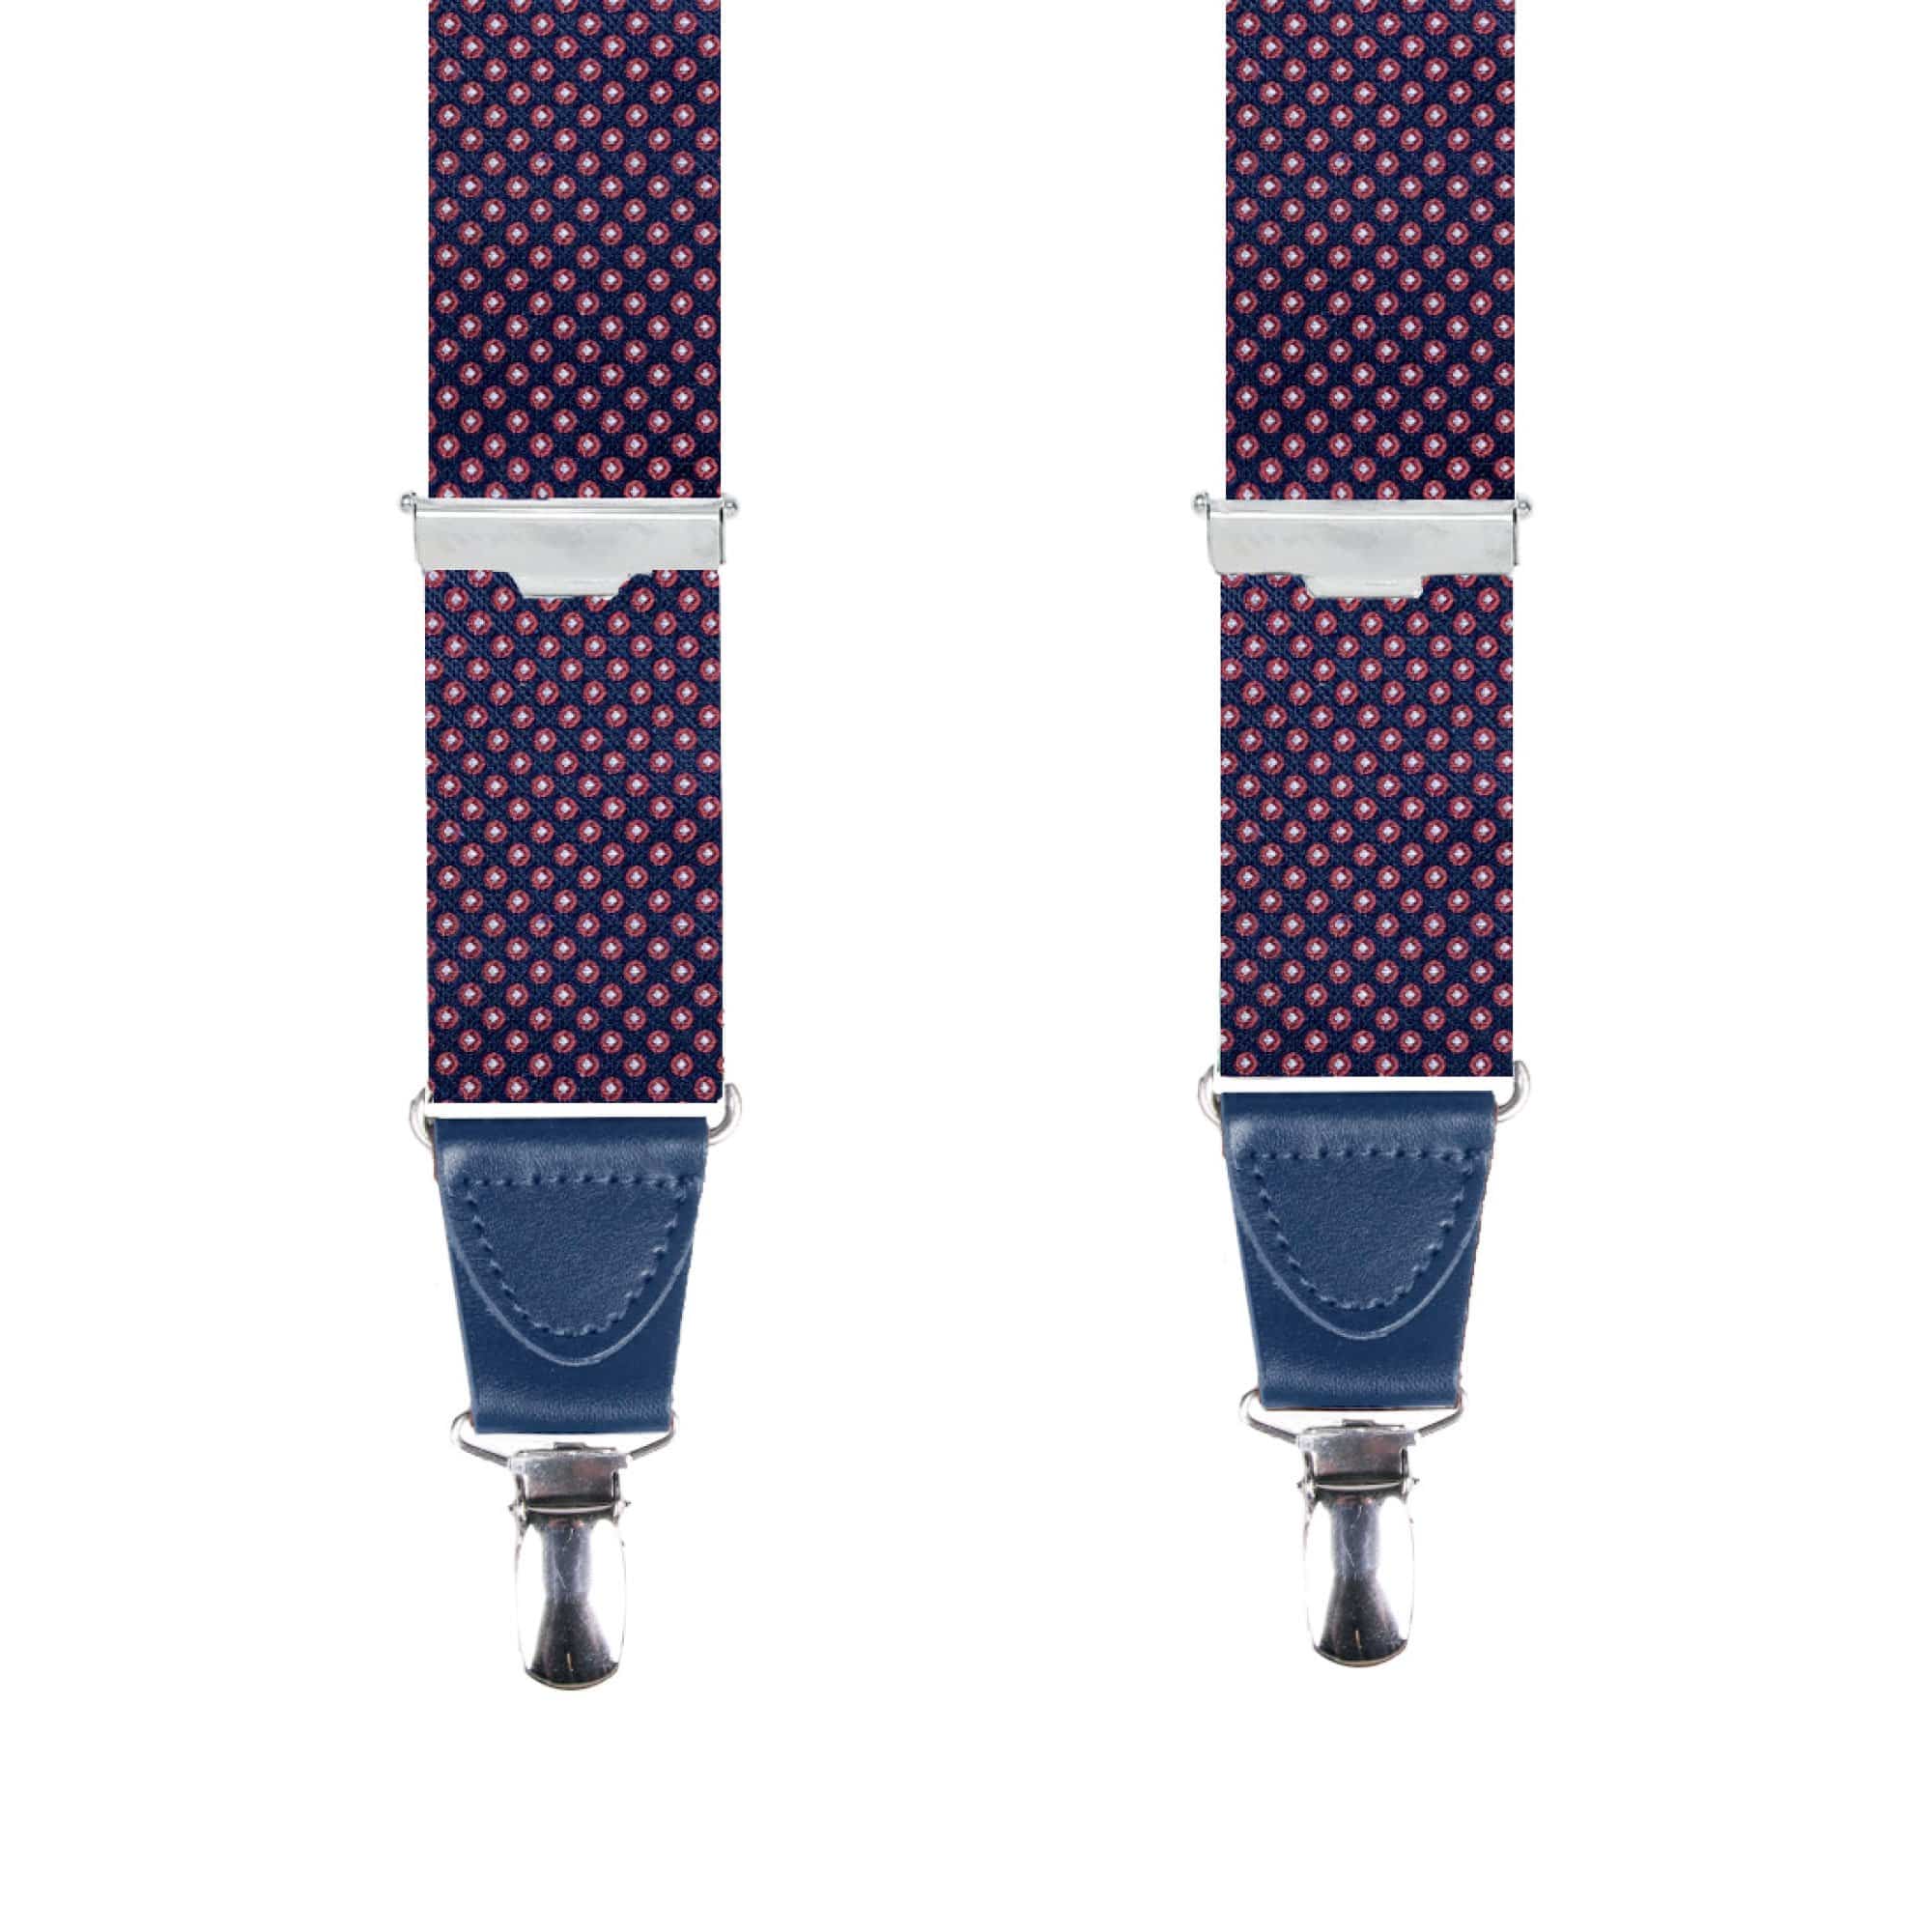 Bortex Fine Tailoring Braces Navy With Red Circles Braces